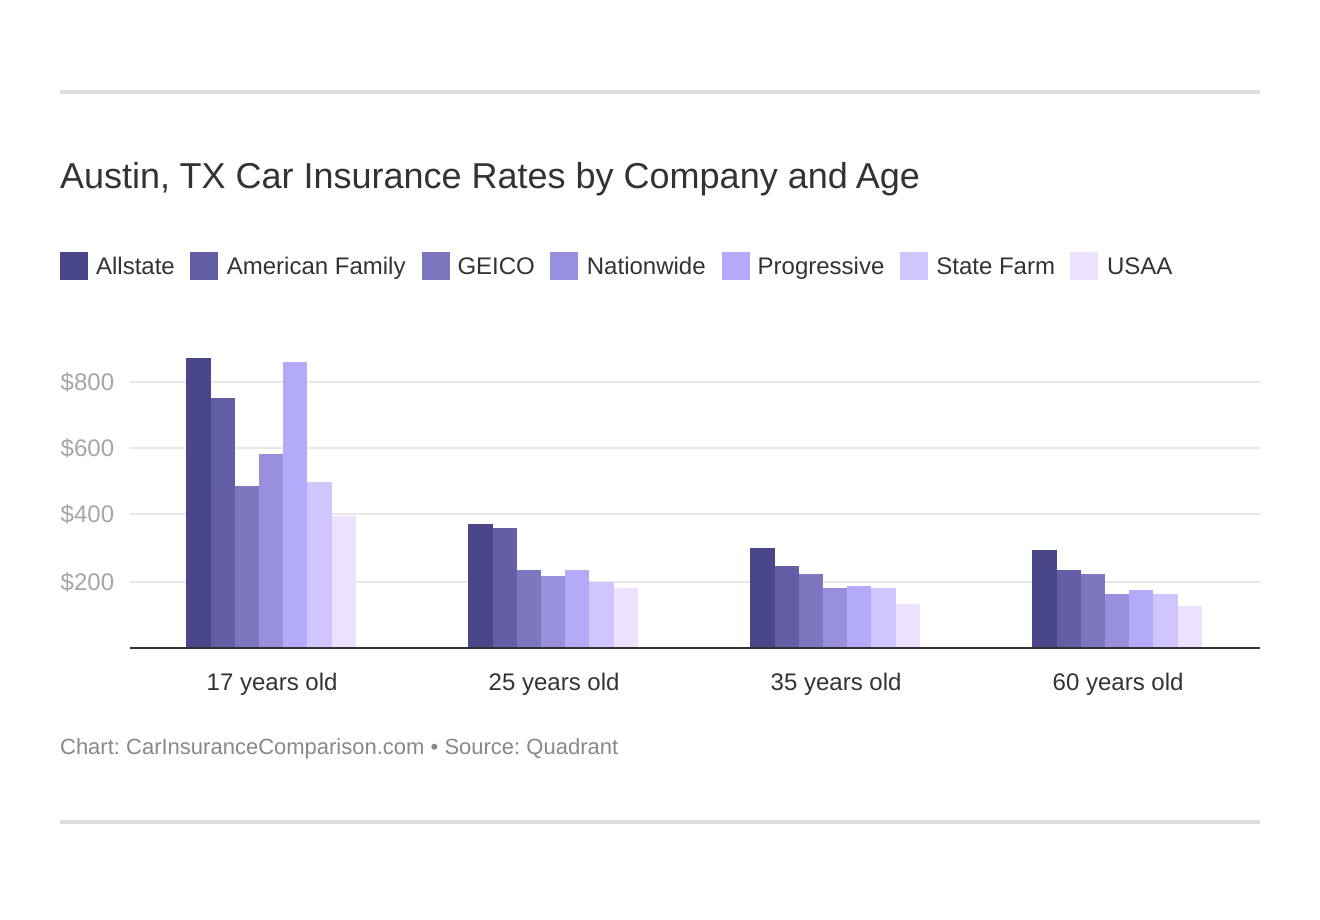 Austin, TX Car Insurance Rates by Company and Age